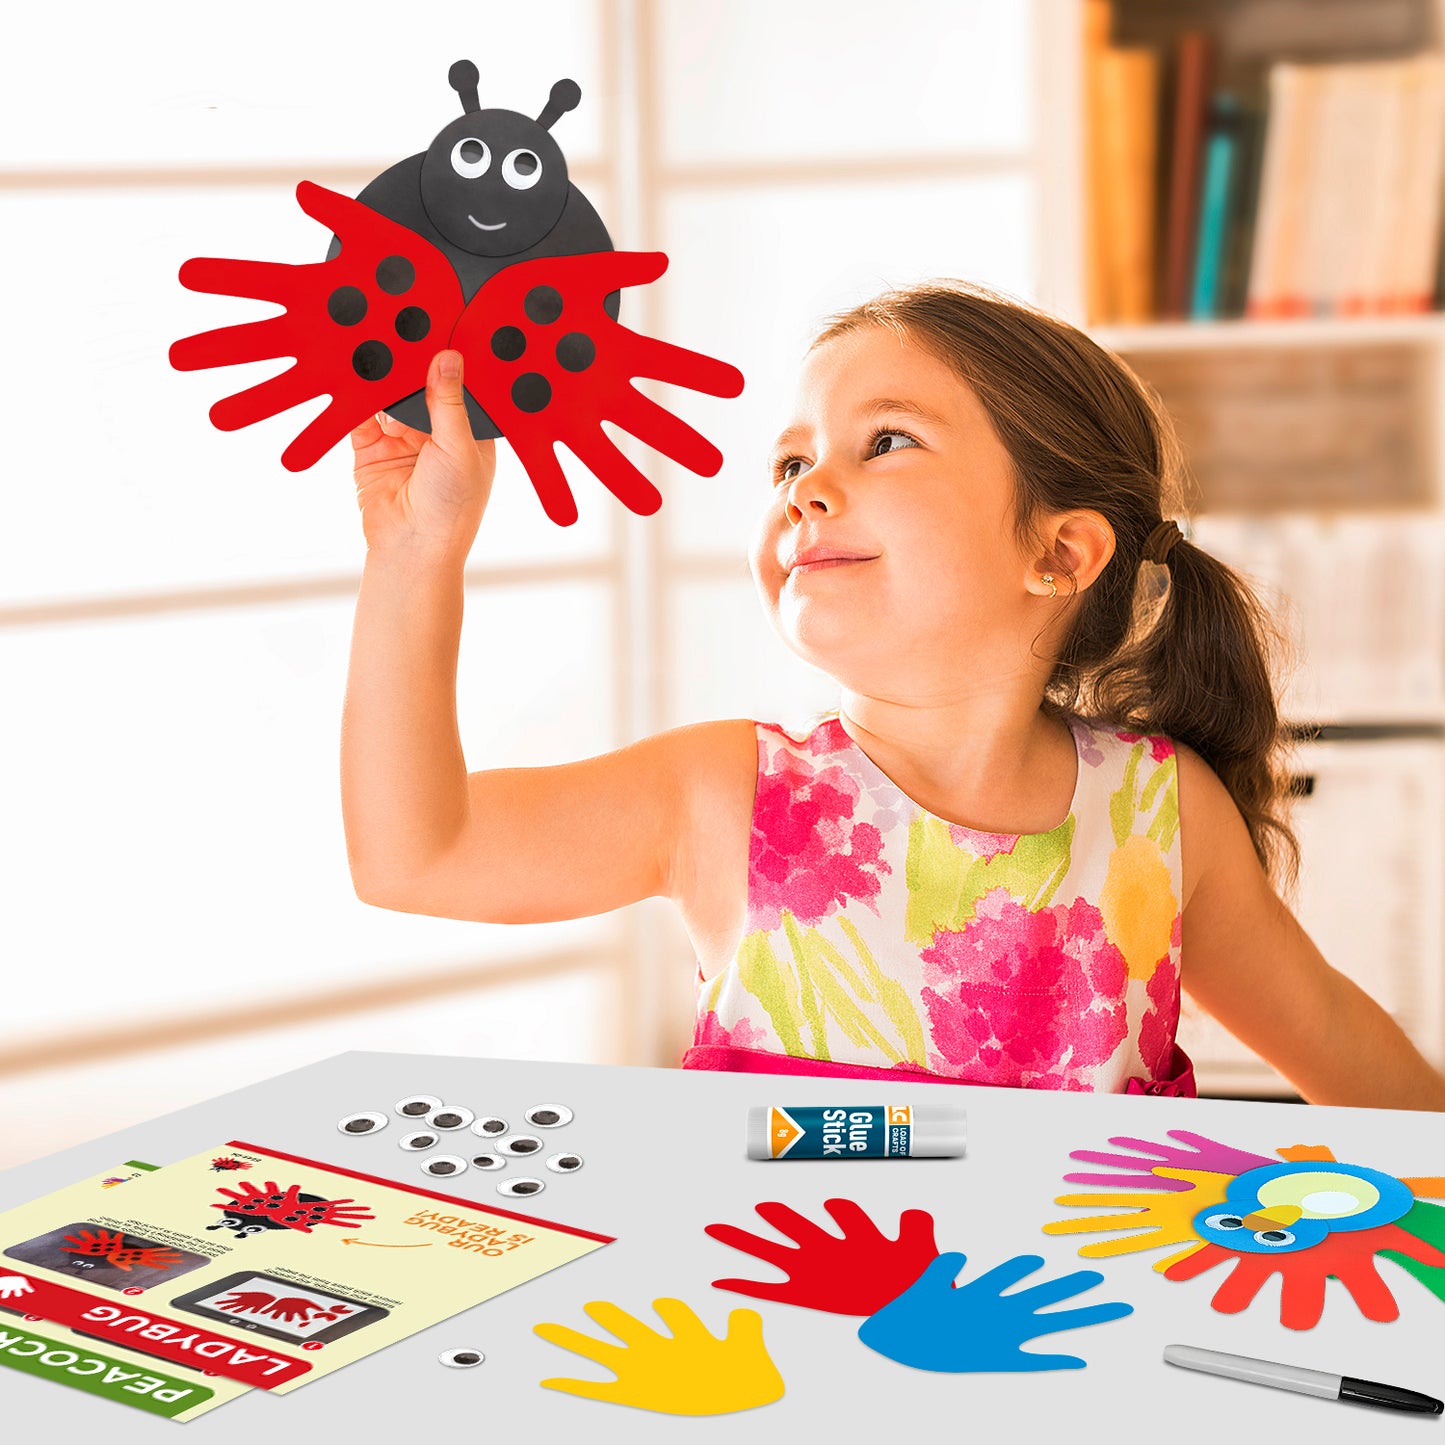 Arts and Craft Kit for Toddlers and Preschoolers, Easy Crafts for Kids Ages 3-5 – Animal Craft Set Includes Supplies and Instructions